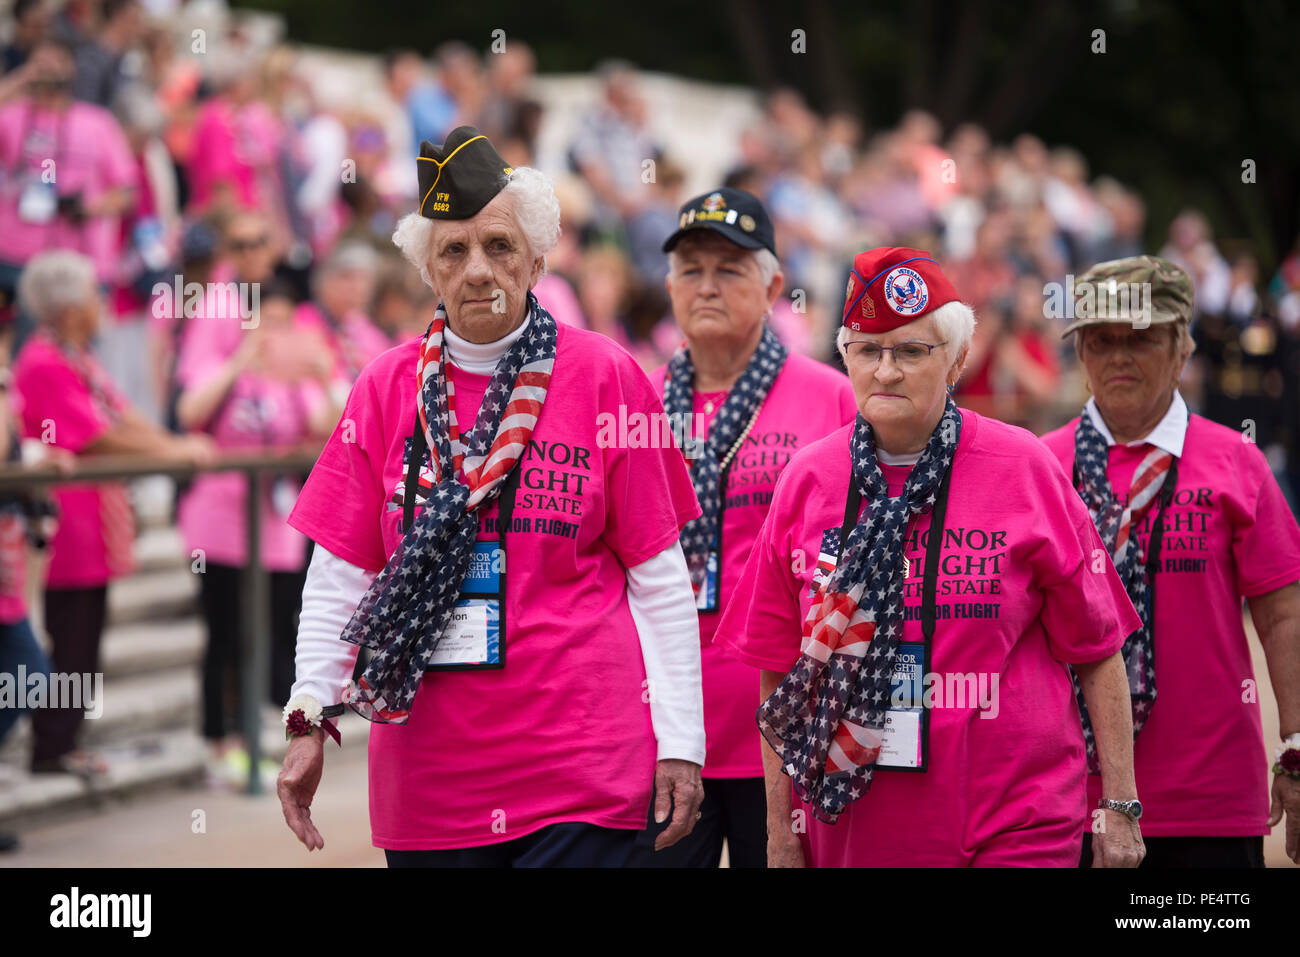 From the left, Women’s Army Corps veteran Marion Clift, Army veteran Betty Downs, Army veteran Sue Williams and veteran Army nurse Beverly Reno walk away from the Tomb of the Unknown Soldier after laying a wreath at Arlington National Cemetery, Sept. 22, 2015, in Arlington, Va. They are part of the first all-female honor flight in the United States. 75 female veterans from World War II, Korean War and Vietnam War were in attendance, as well as 75 escorts, who were also female veterans or active-duty military. (U.S. Army photo by Rachel Larue/released) Stock Photo